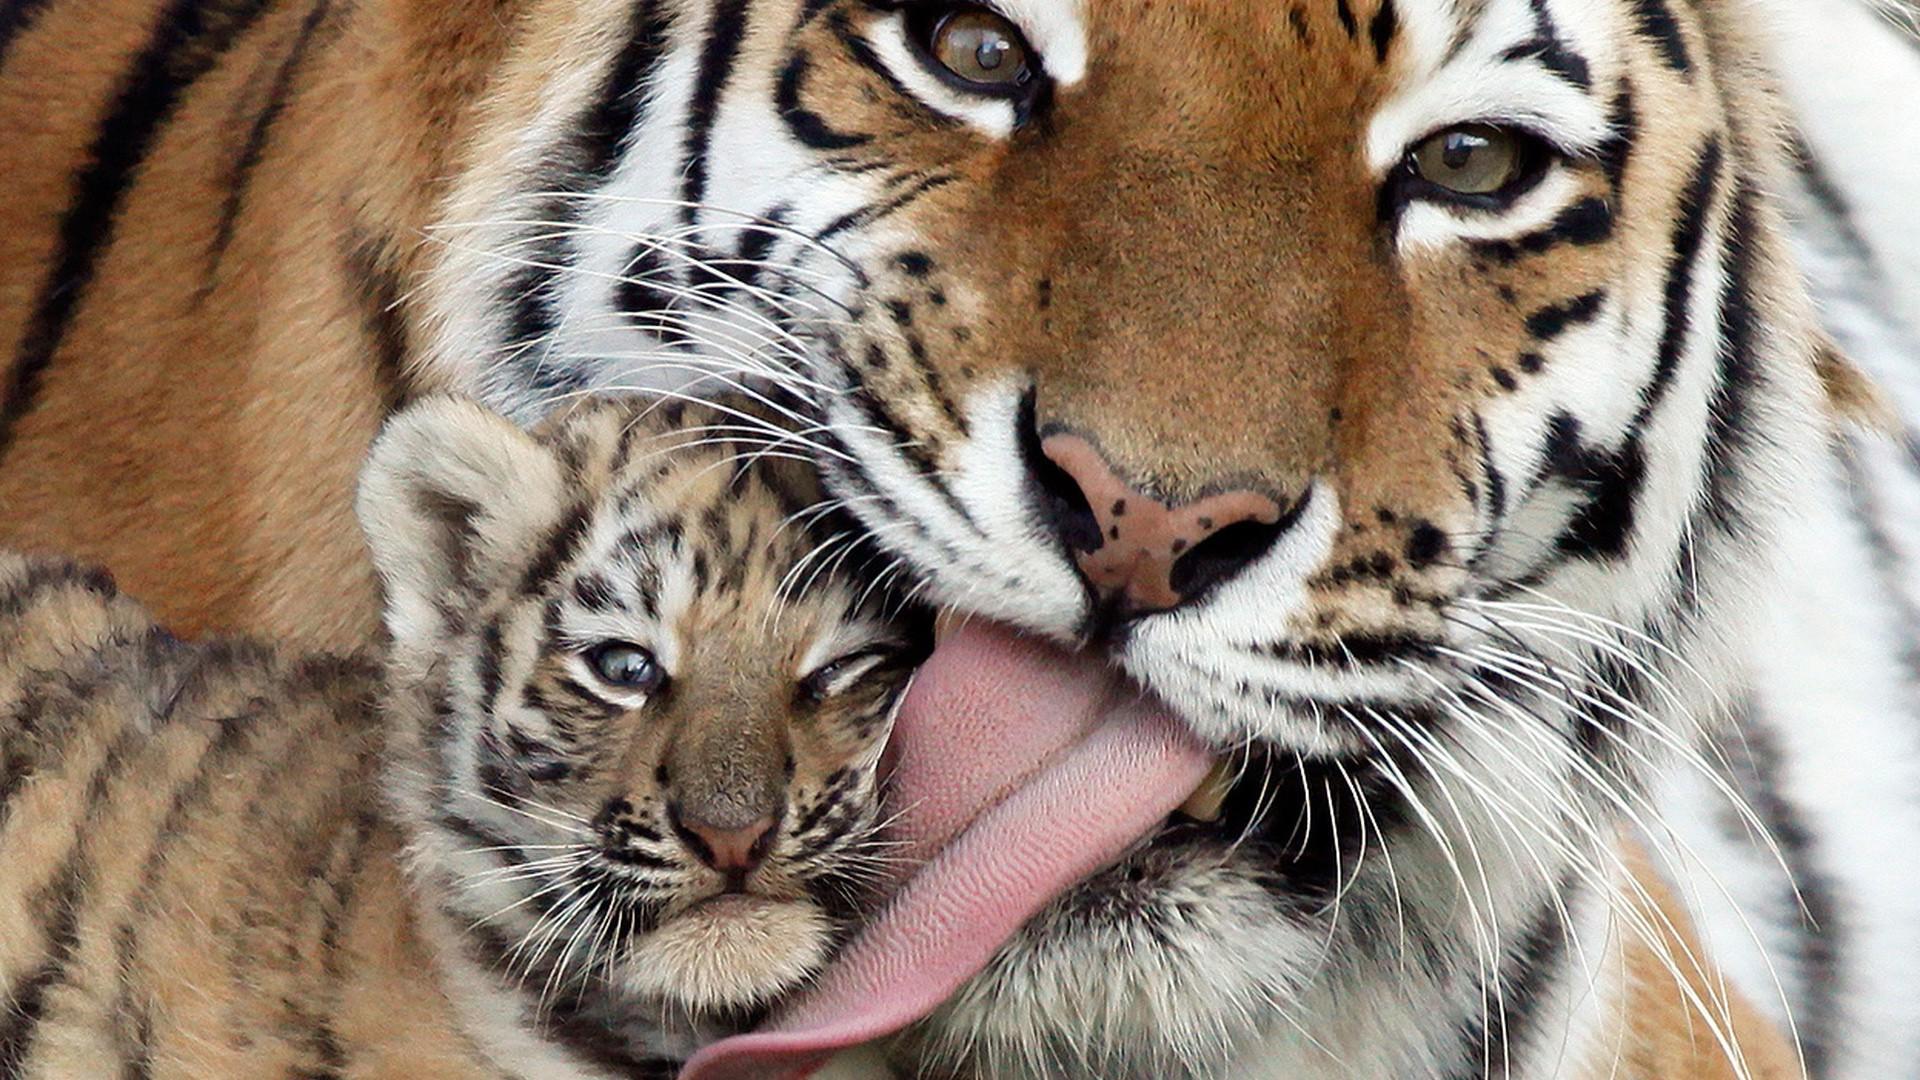 Baby Tiger With Mother HD Wallpaperx1080